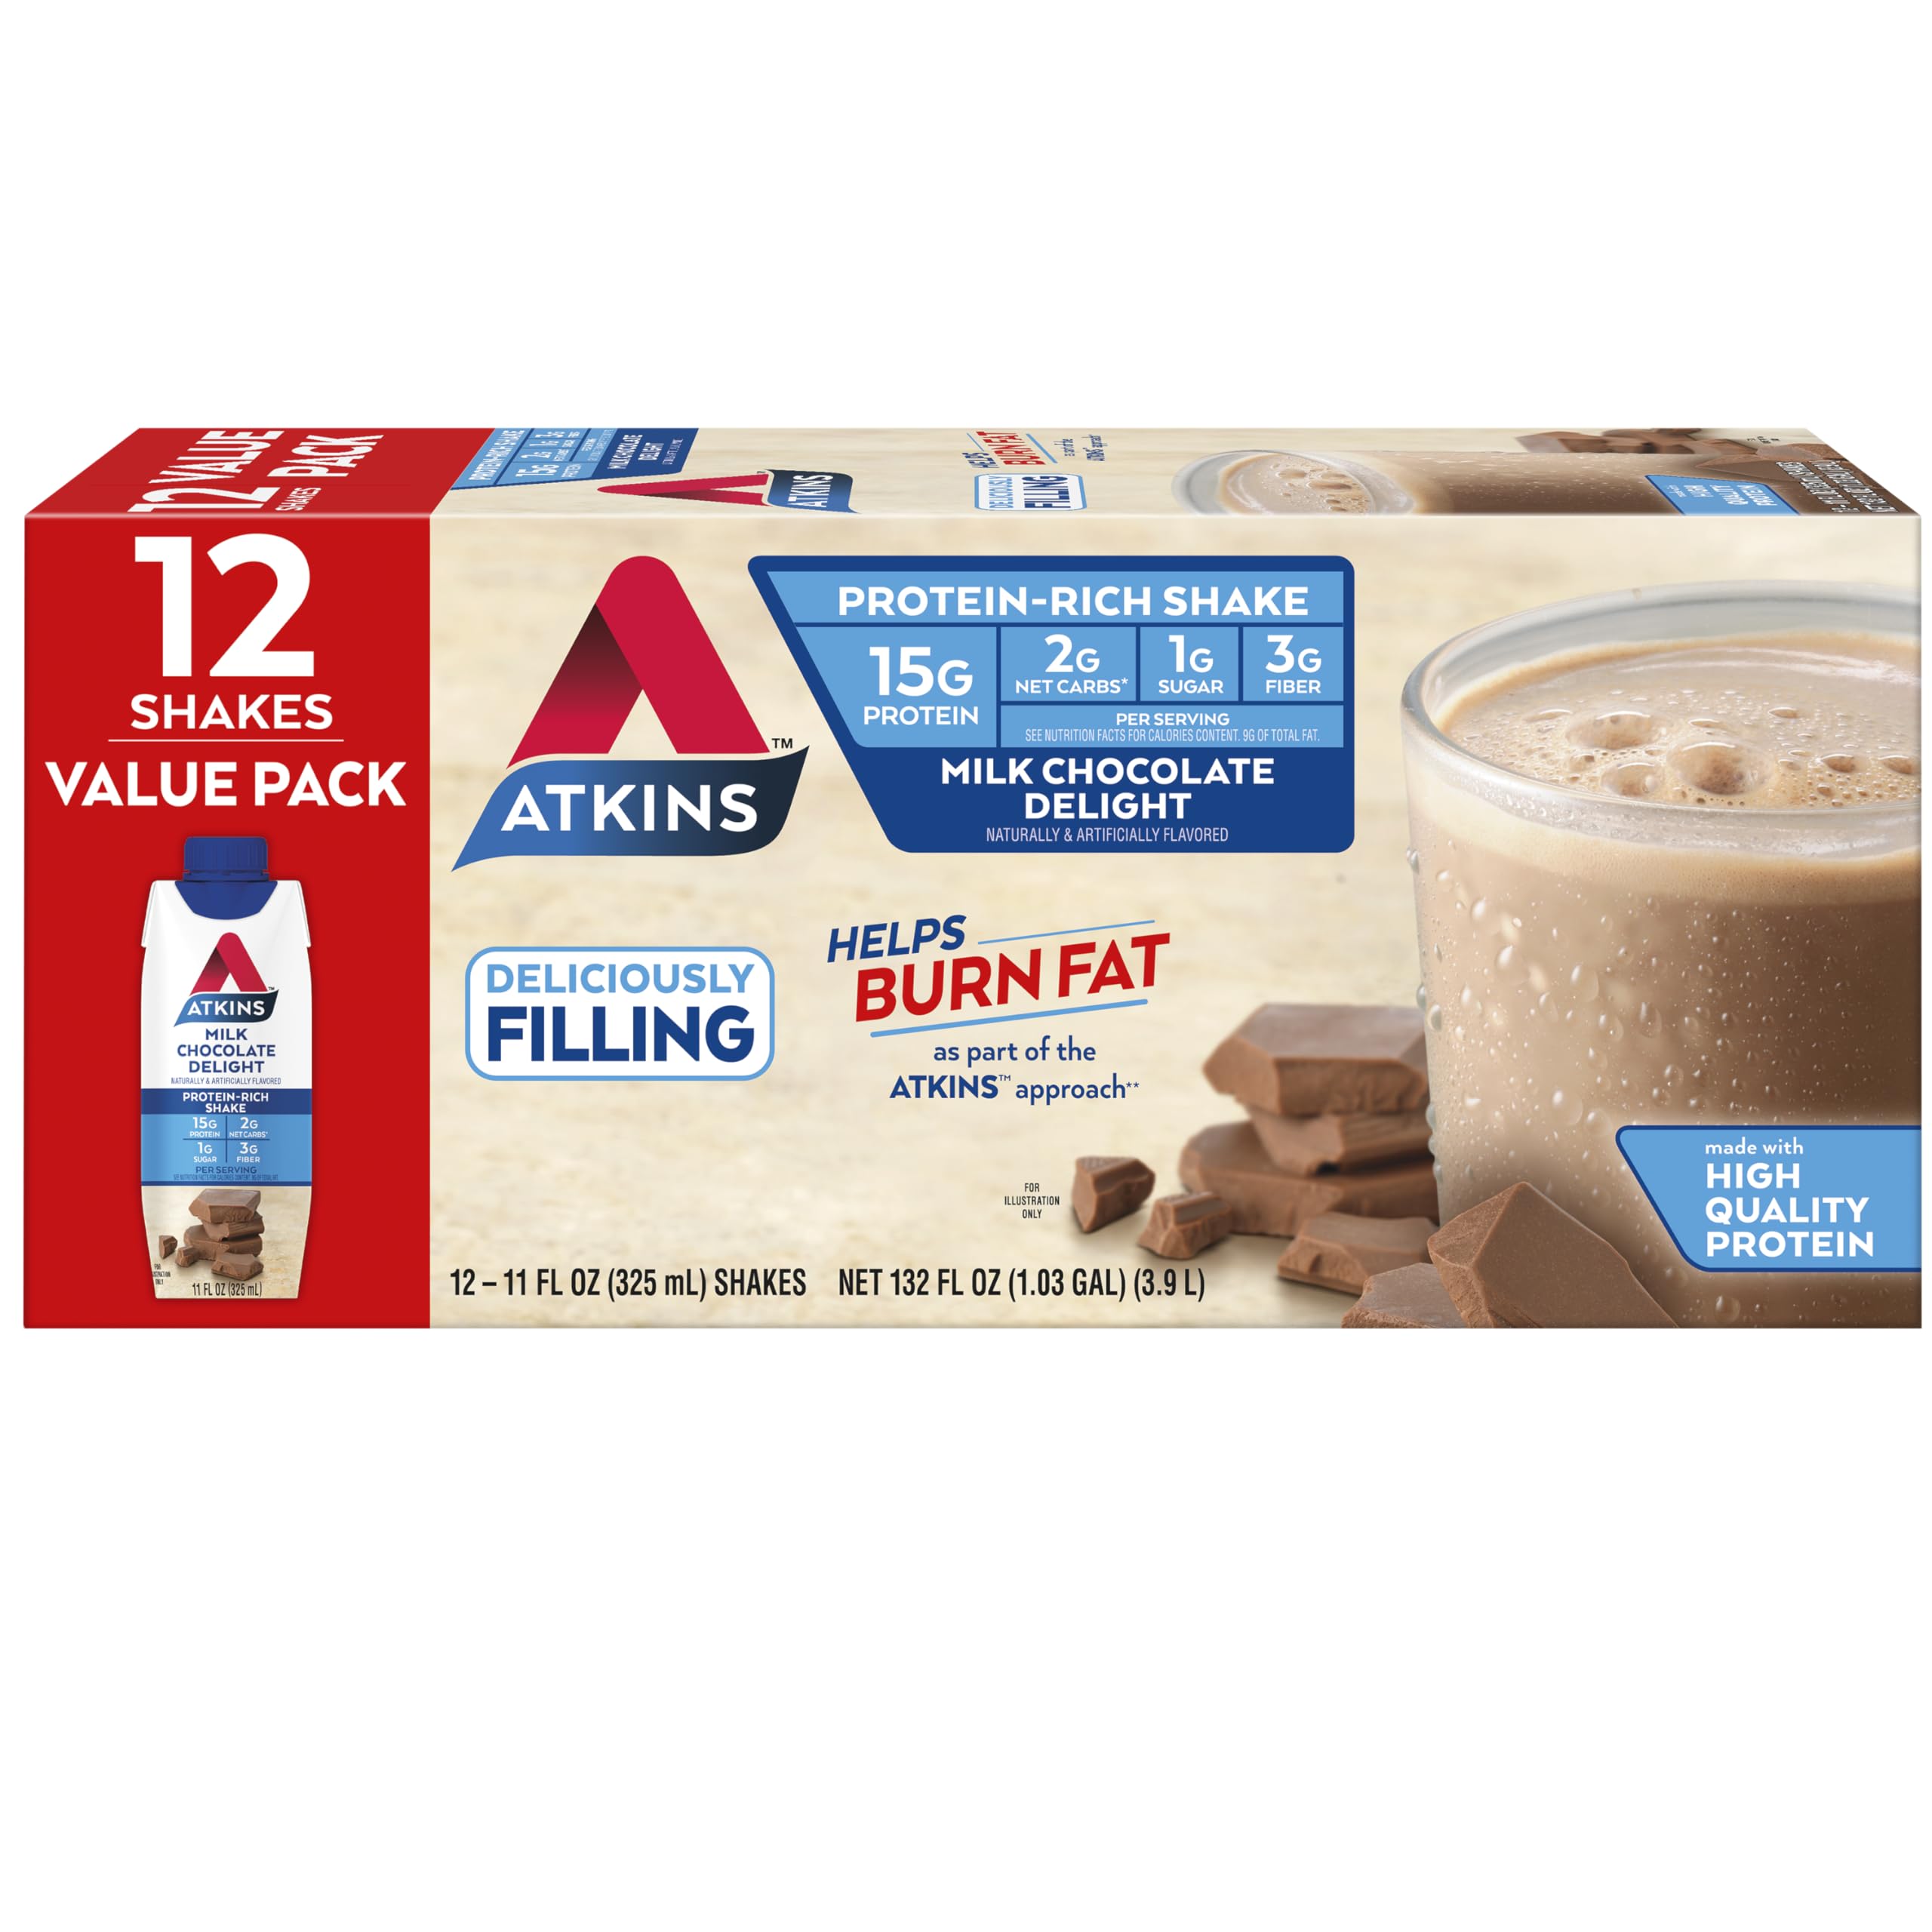 Atkins Milk Chocolate Delight Protein Shake, 15g Protein, Low Glycemic, 2g Net Carb, 1g Sugar, Keto Friendly, 12 Count>